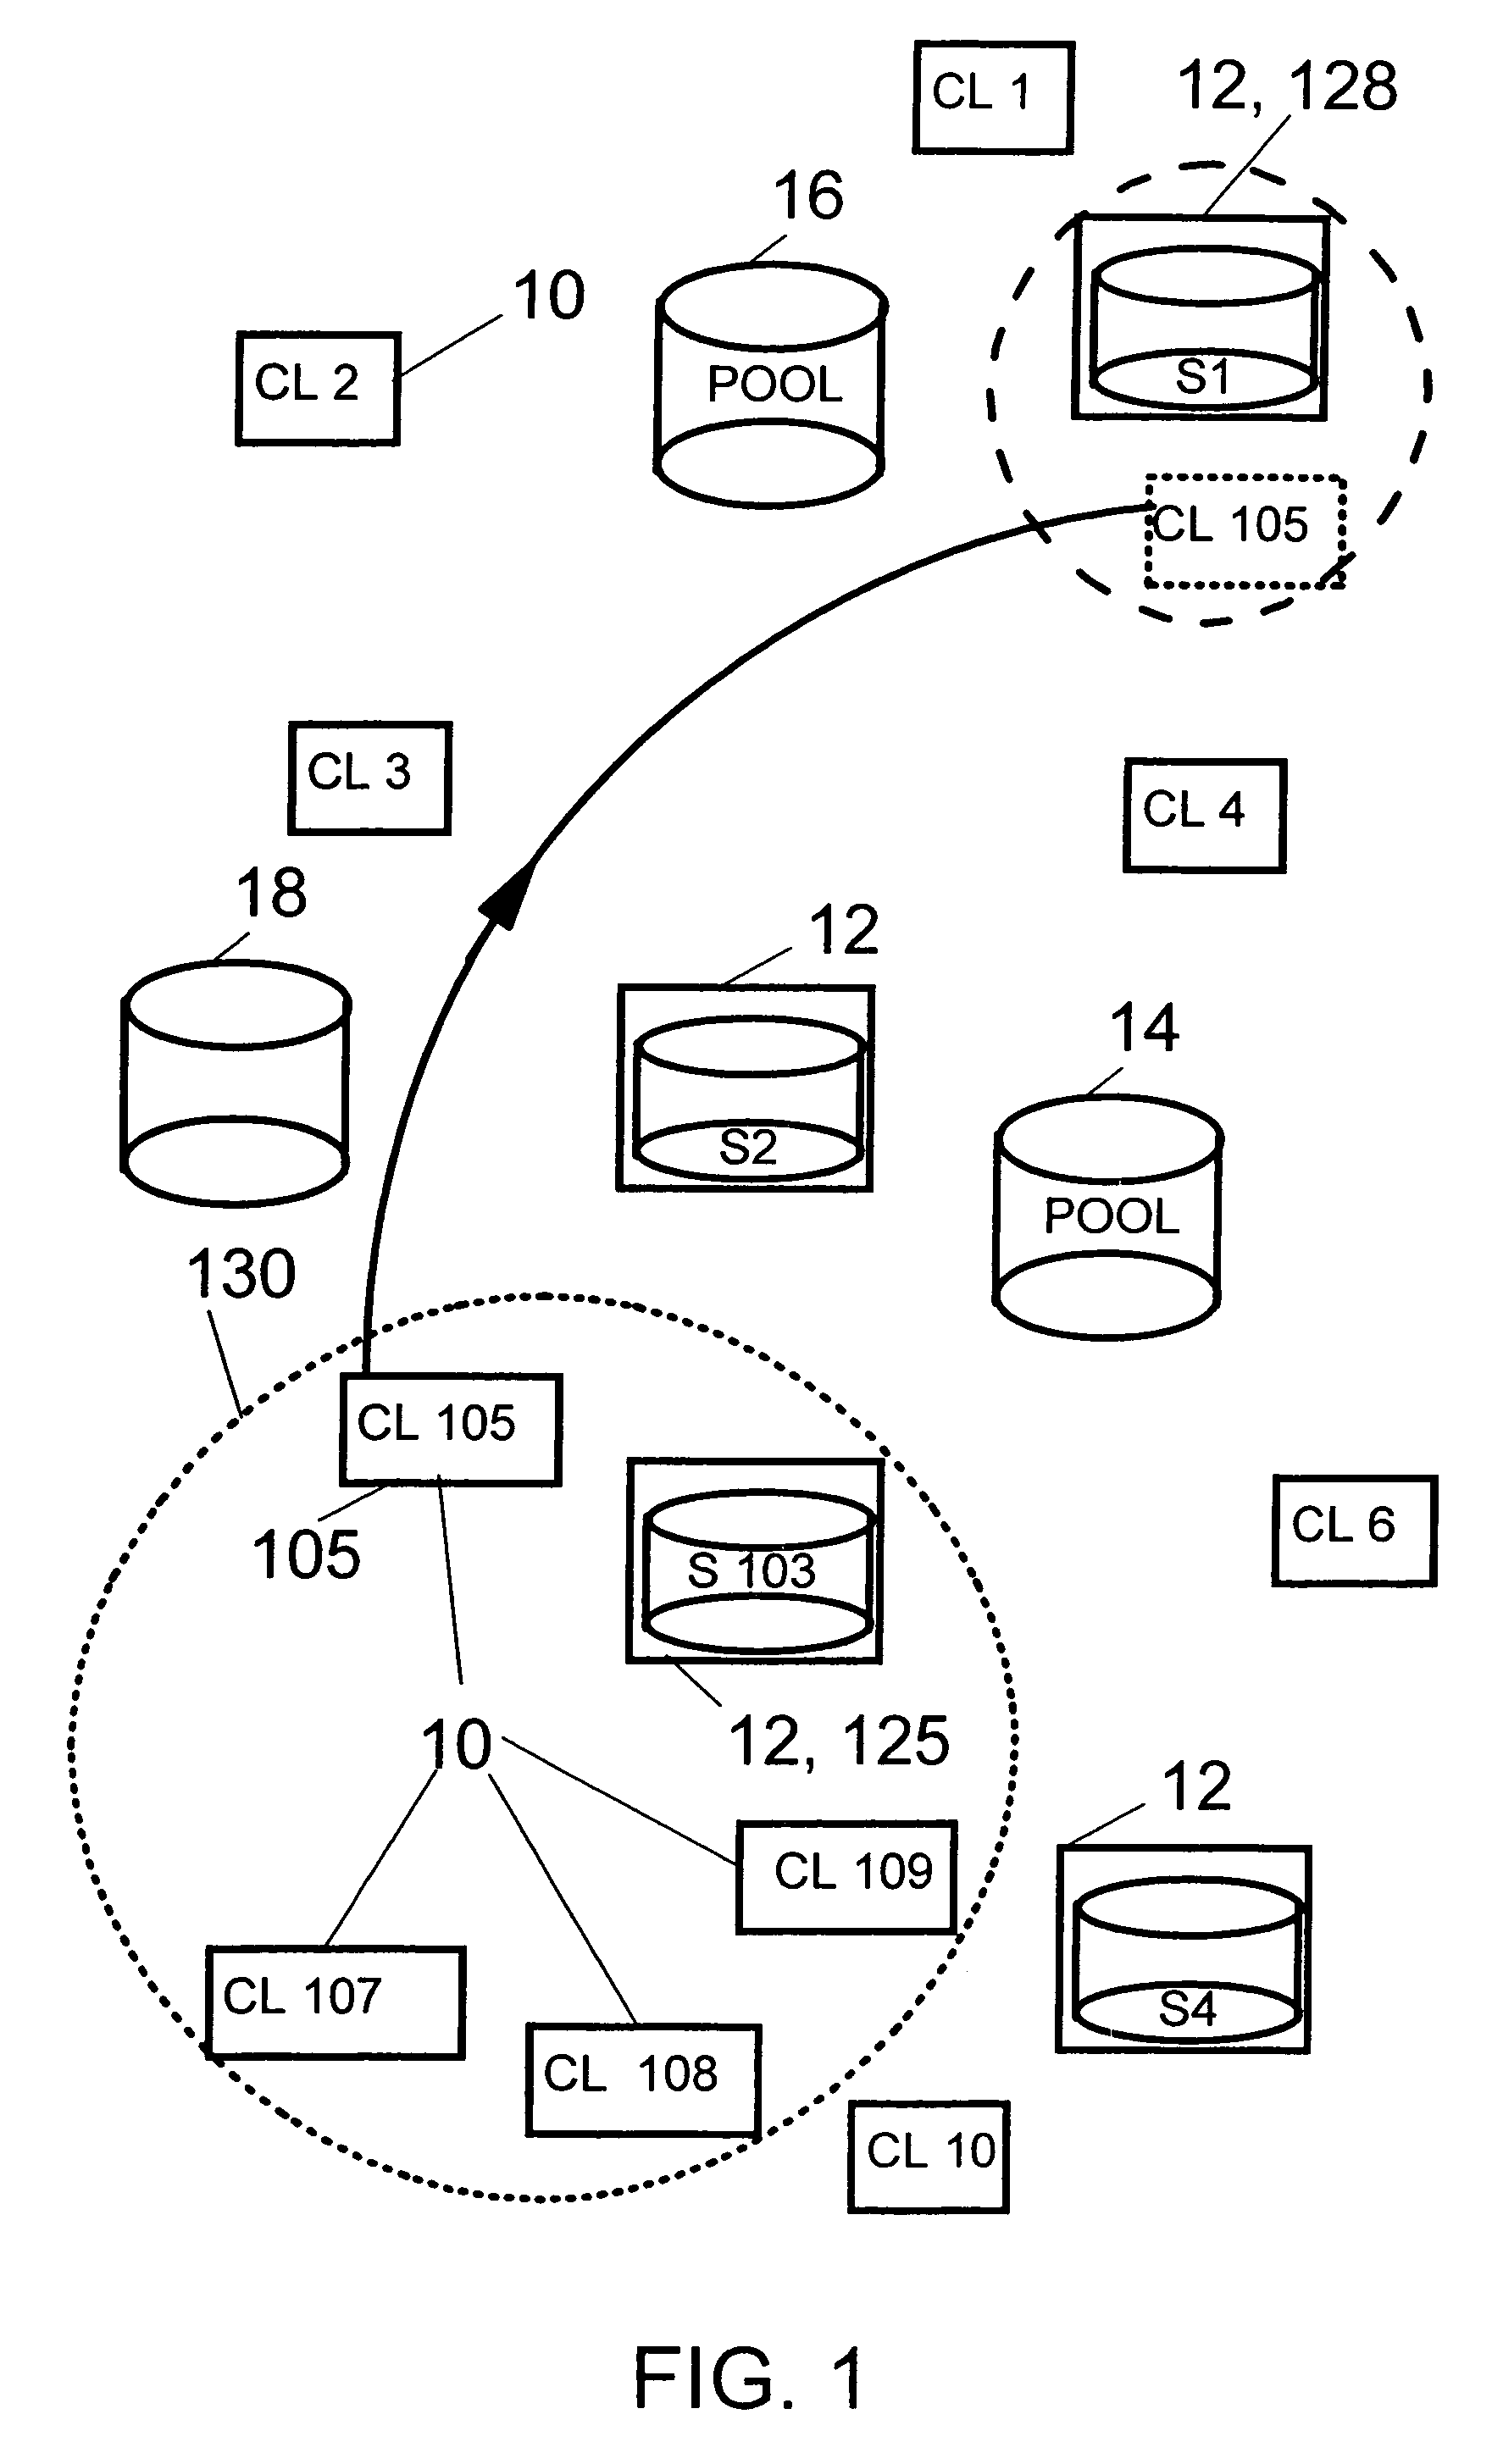 Location independent backup of data from mobile and stationary computers in wide regions regarding network and server activities